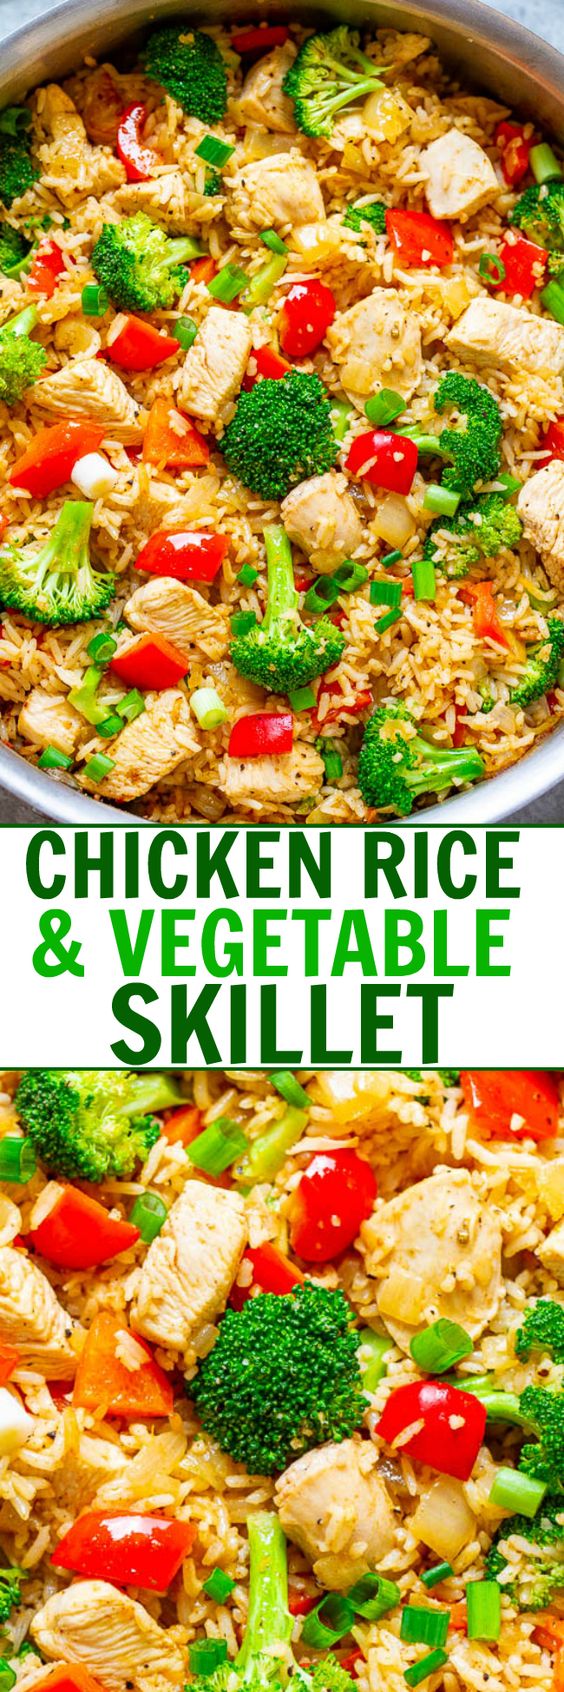 Chicken,-Rice,-and-Vegetable-Skillet